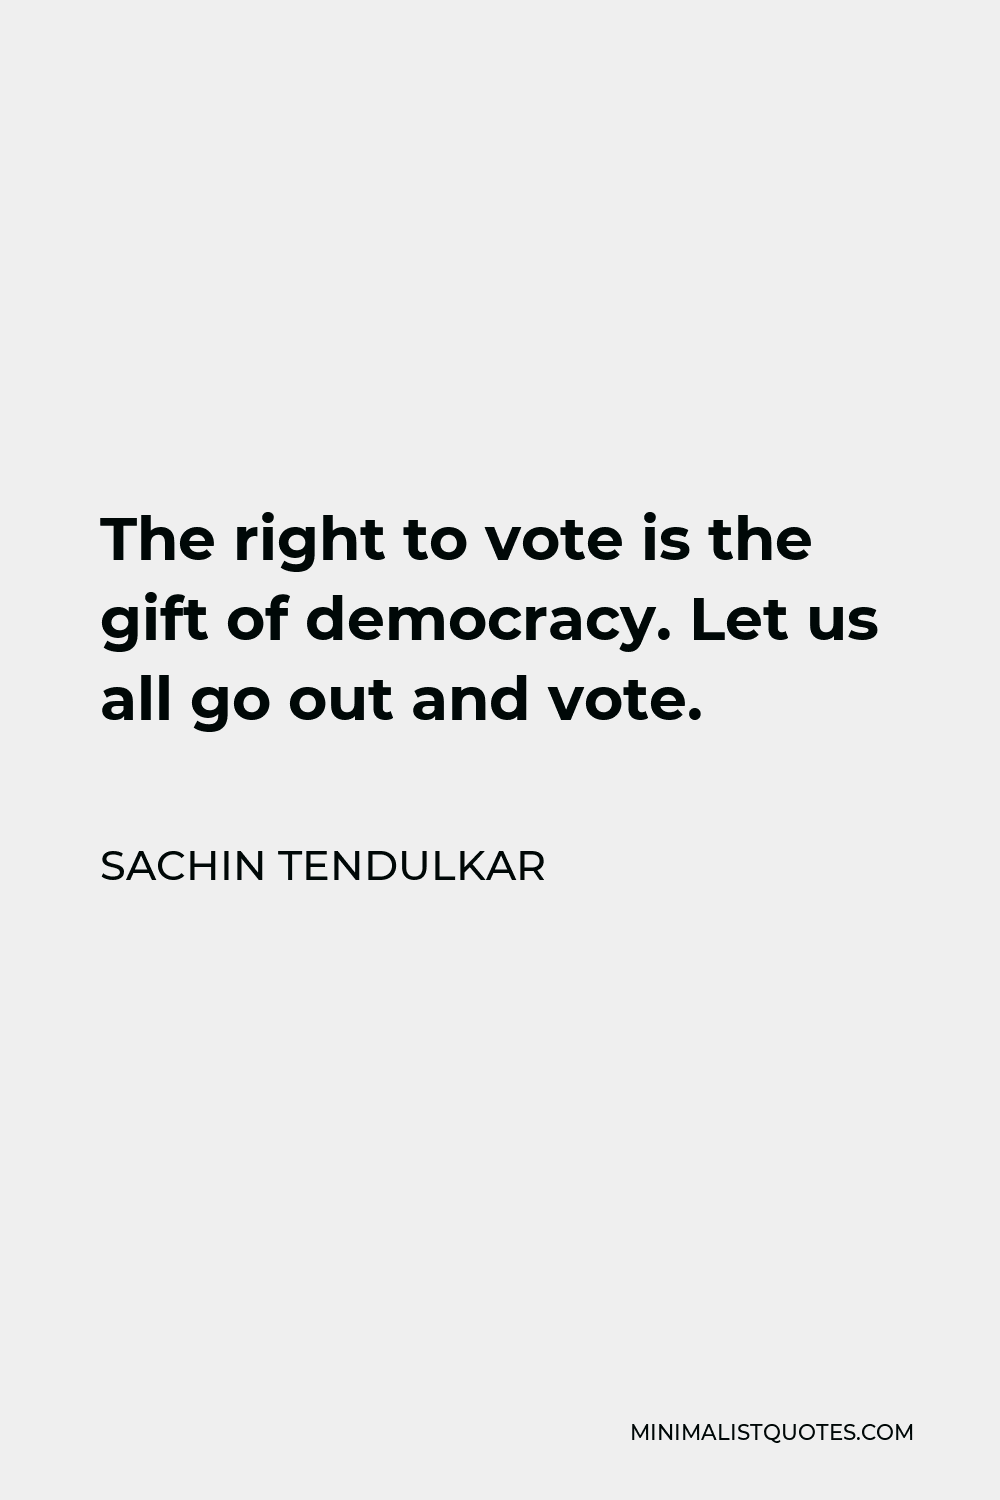 Sachin Tendulkar Quote - The right to vote is the gift of democracy. Let us all go out and vote.